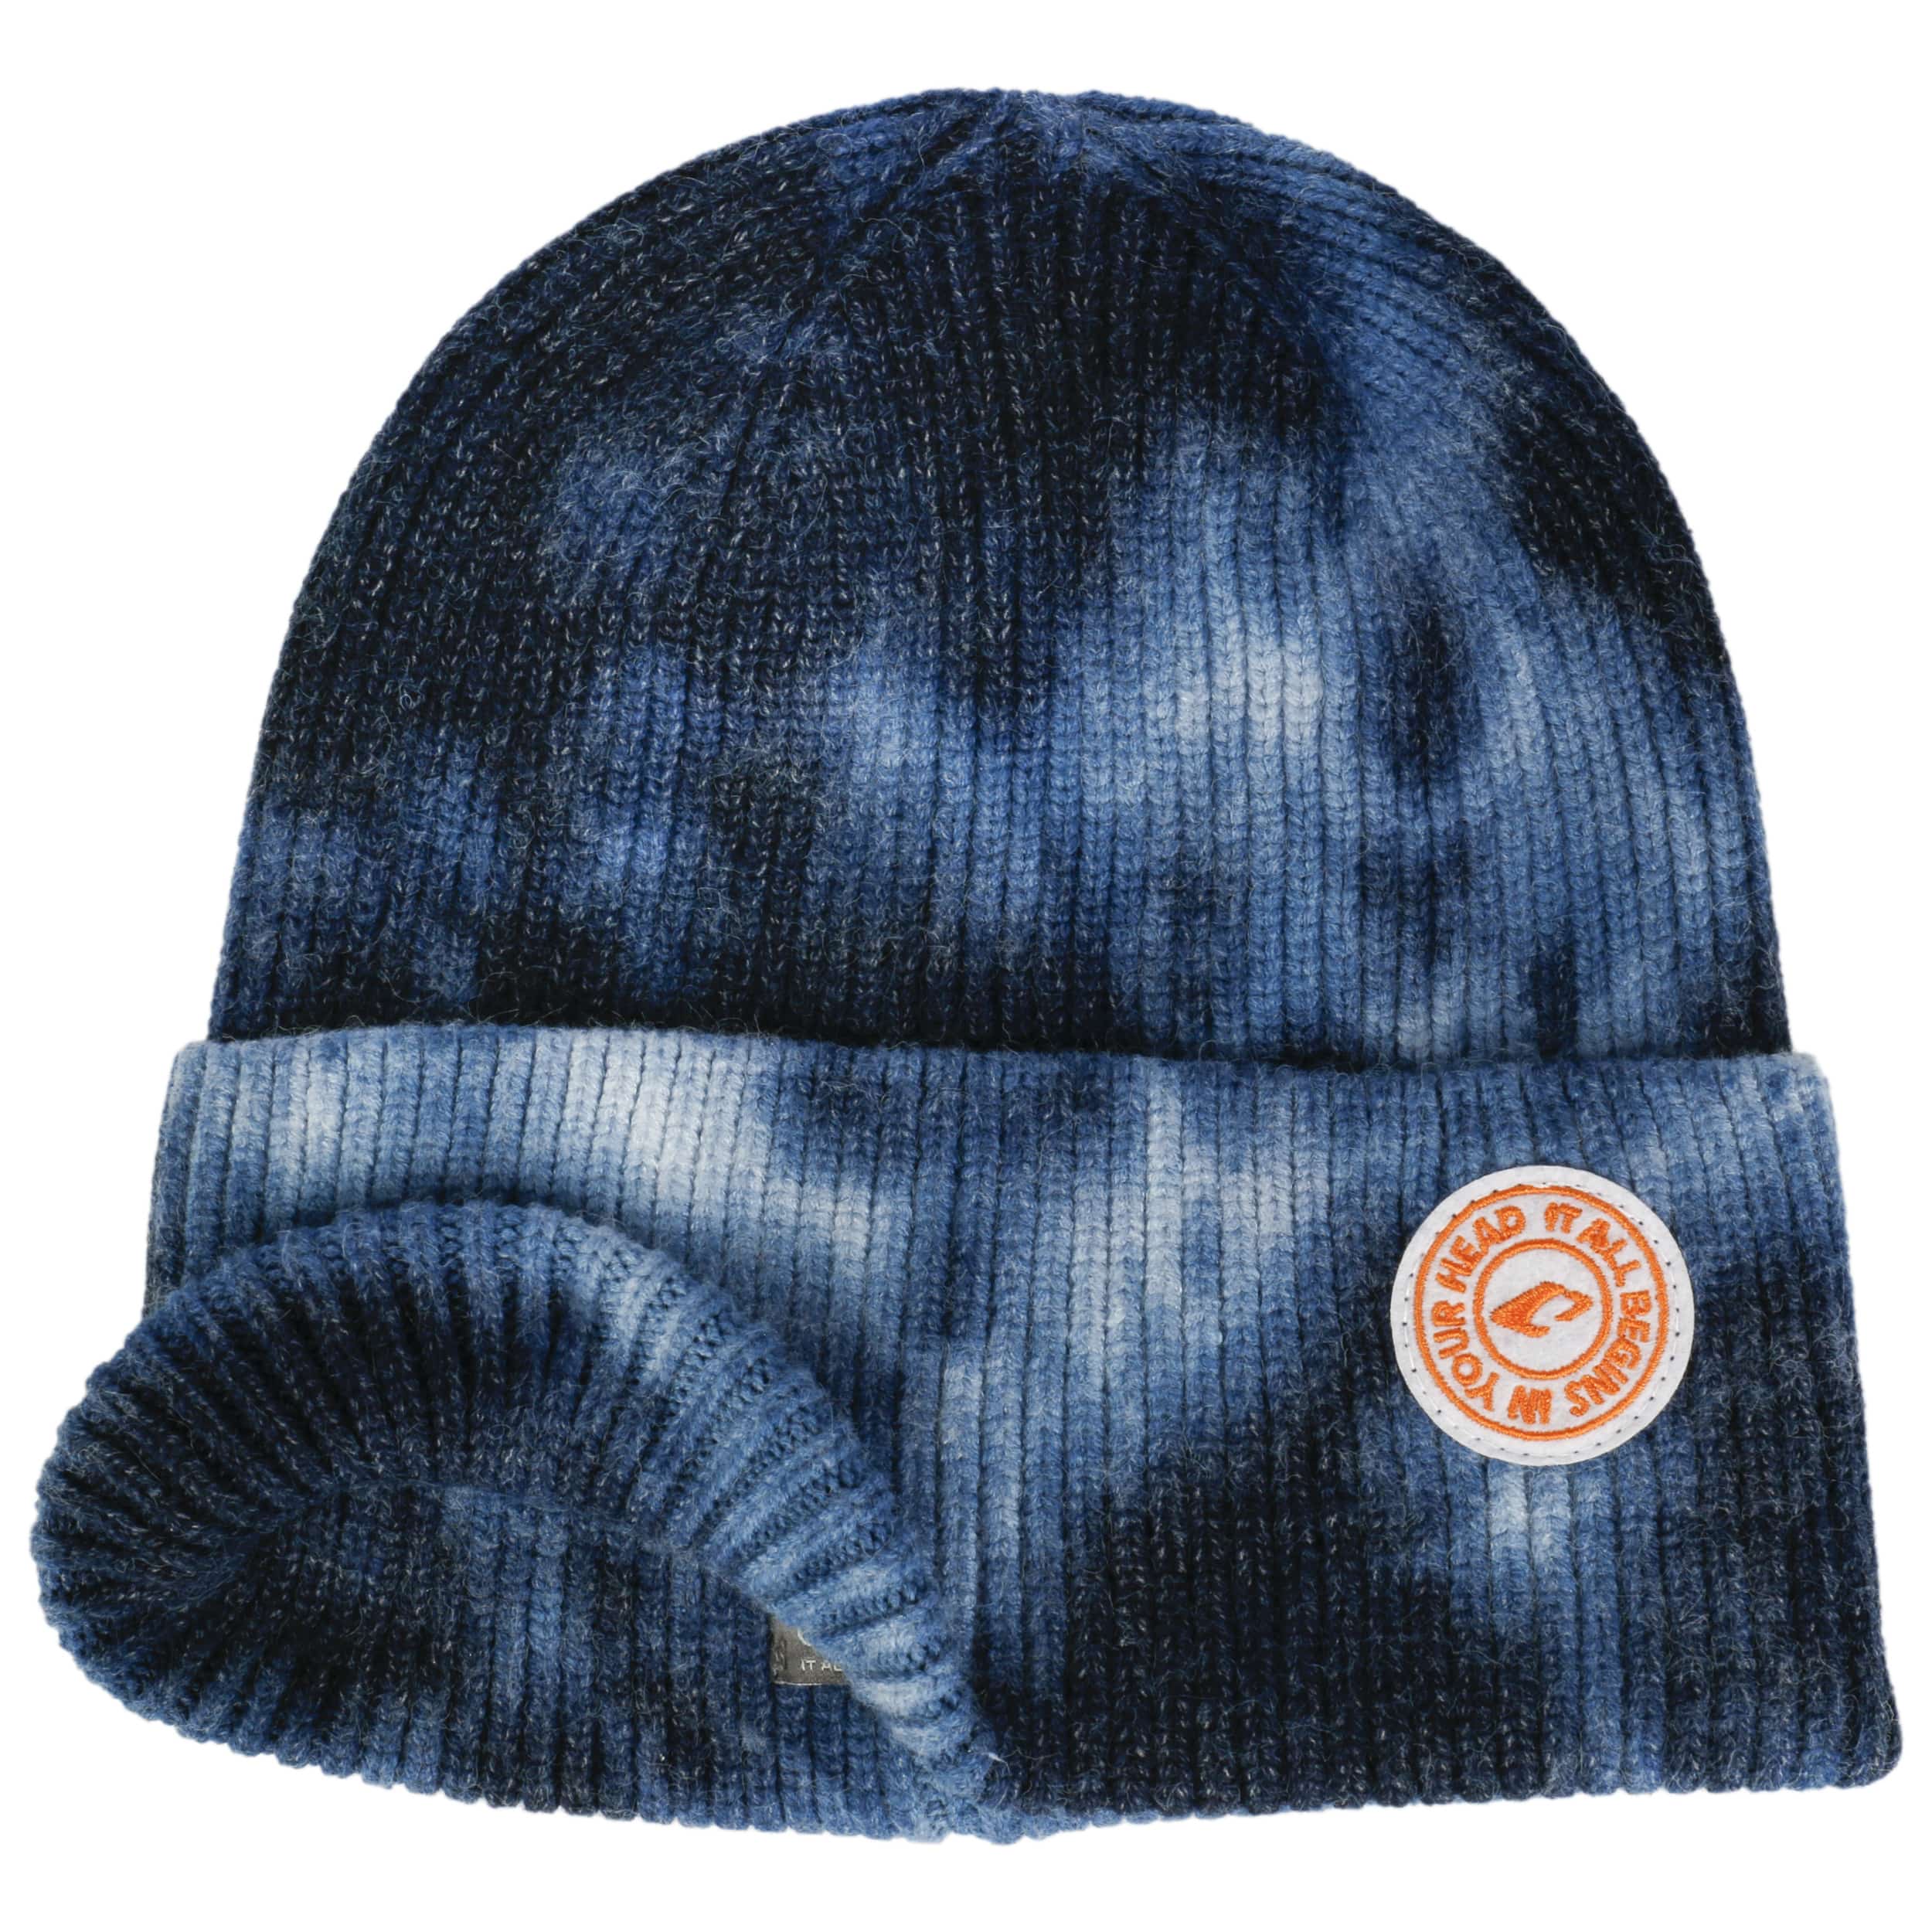 by Dye Yuna Beanie 28,95 € Tie Hat Chillouts -